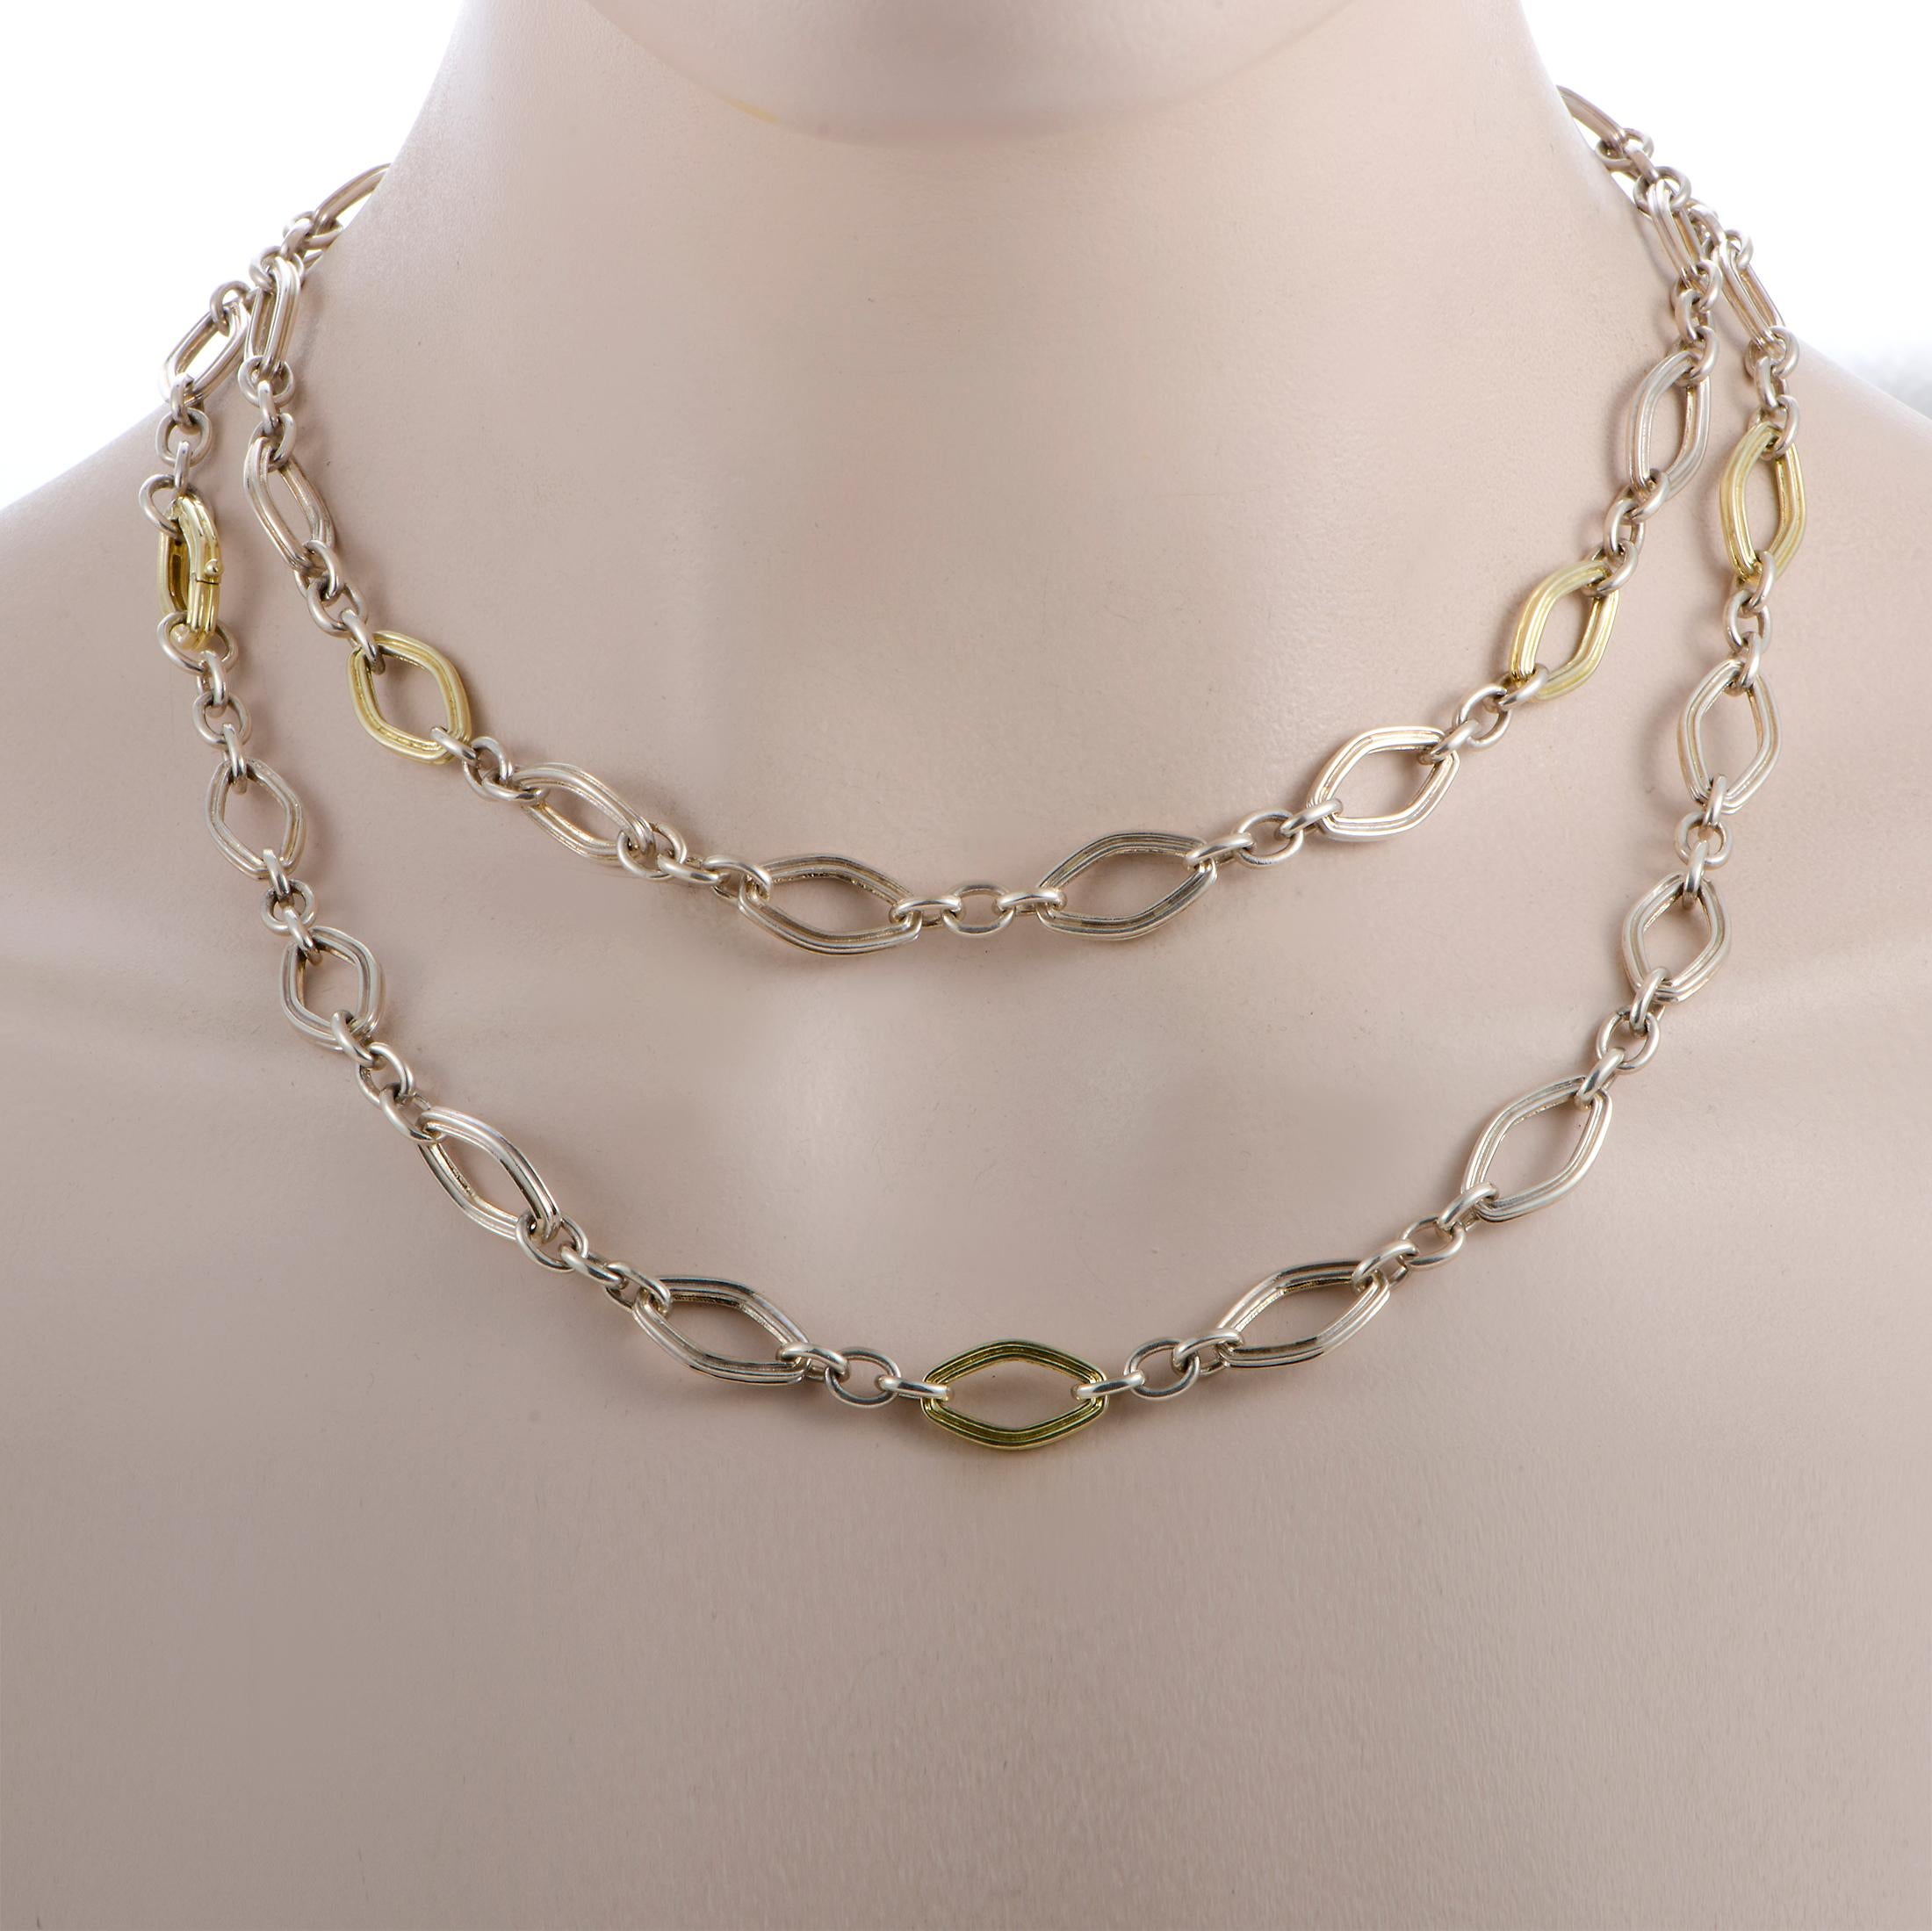 This Charles Krypell necklace is made out of 14K yellow gold and silver and weighs 75 grams, measuring 35” in length.

The necklace is offered in brand new condition and includes a gift box.